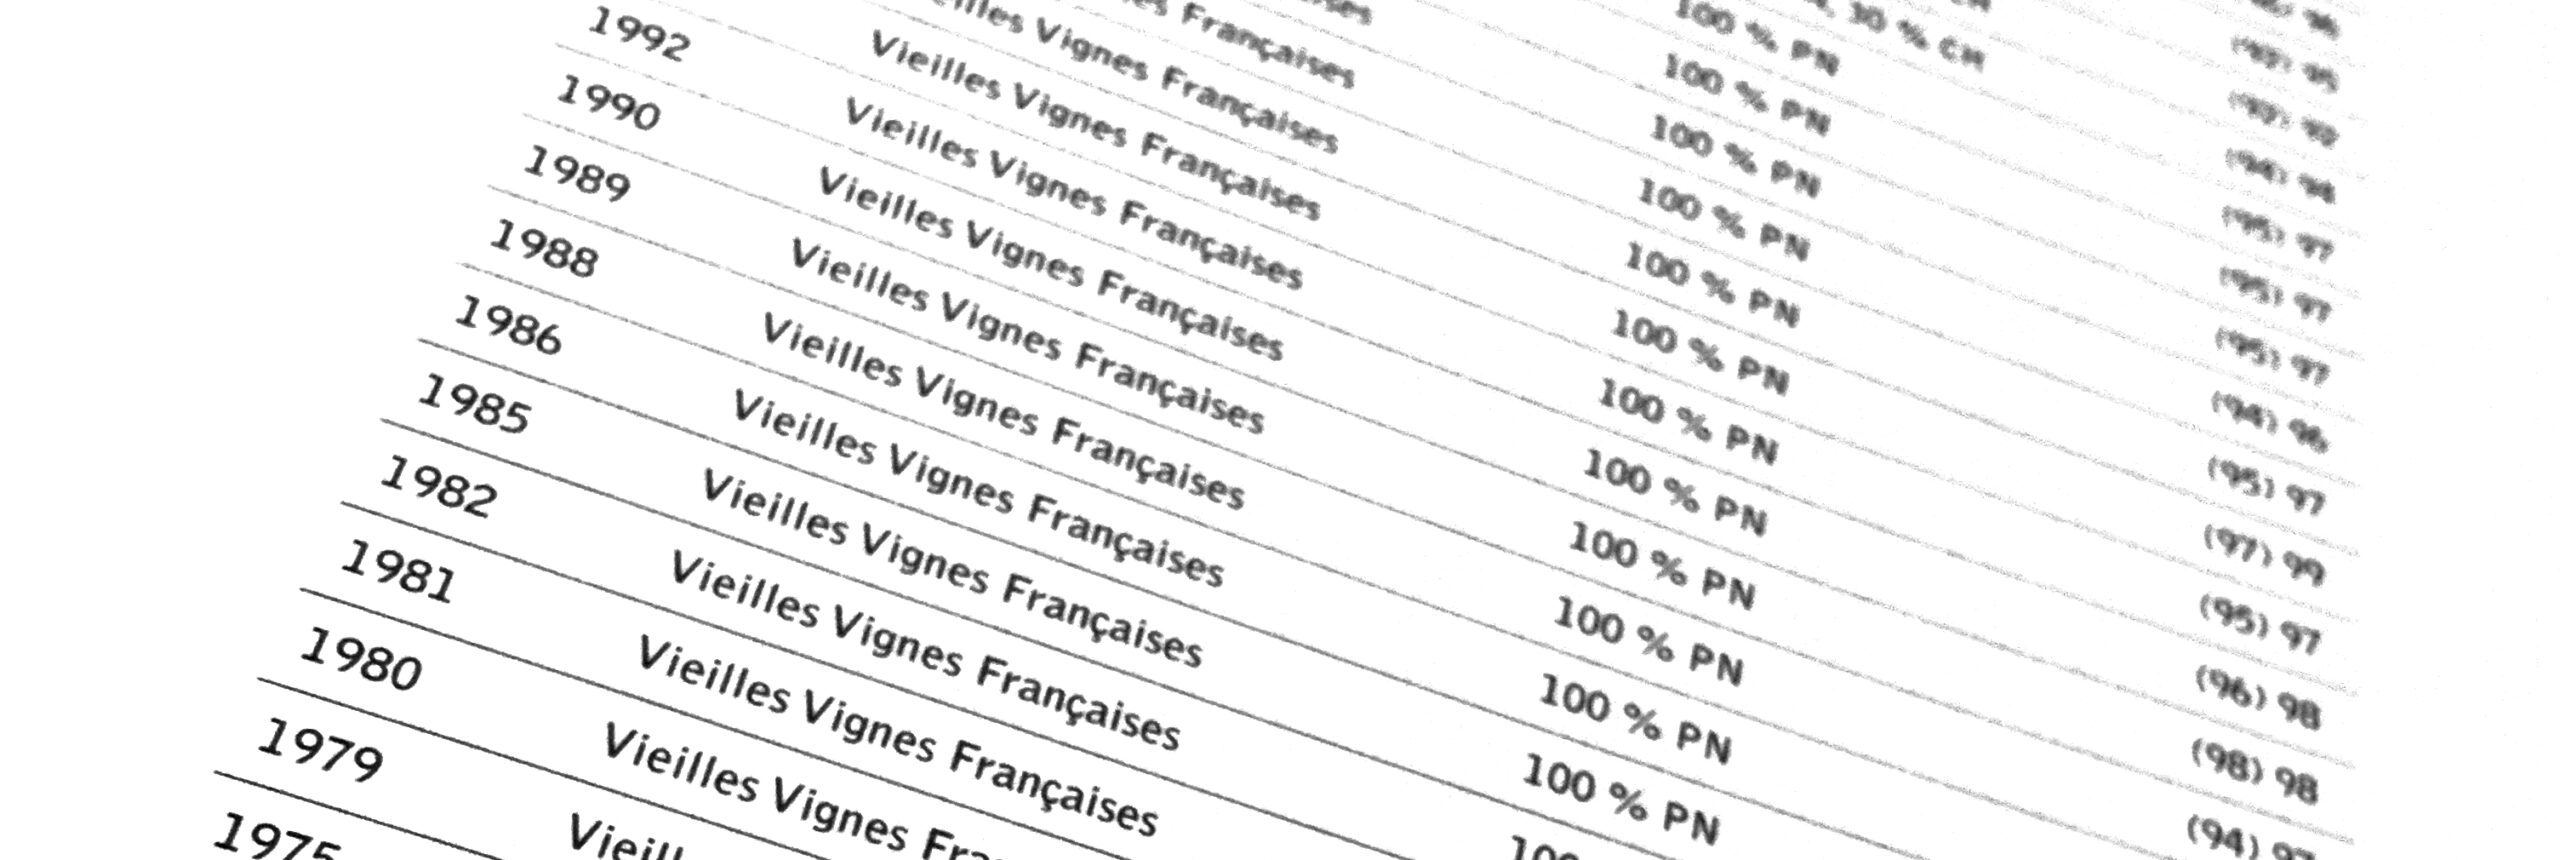 The ultimate champagne vintage guide 1900 to 2019 Champagne Club Site